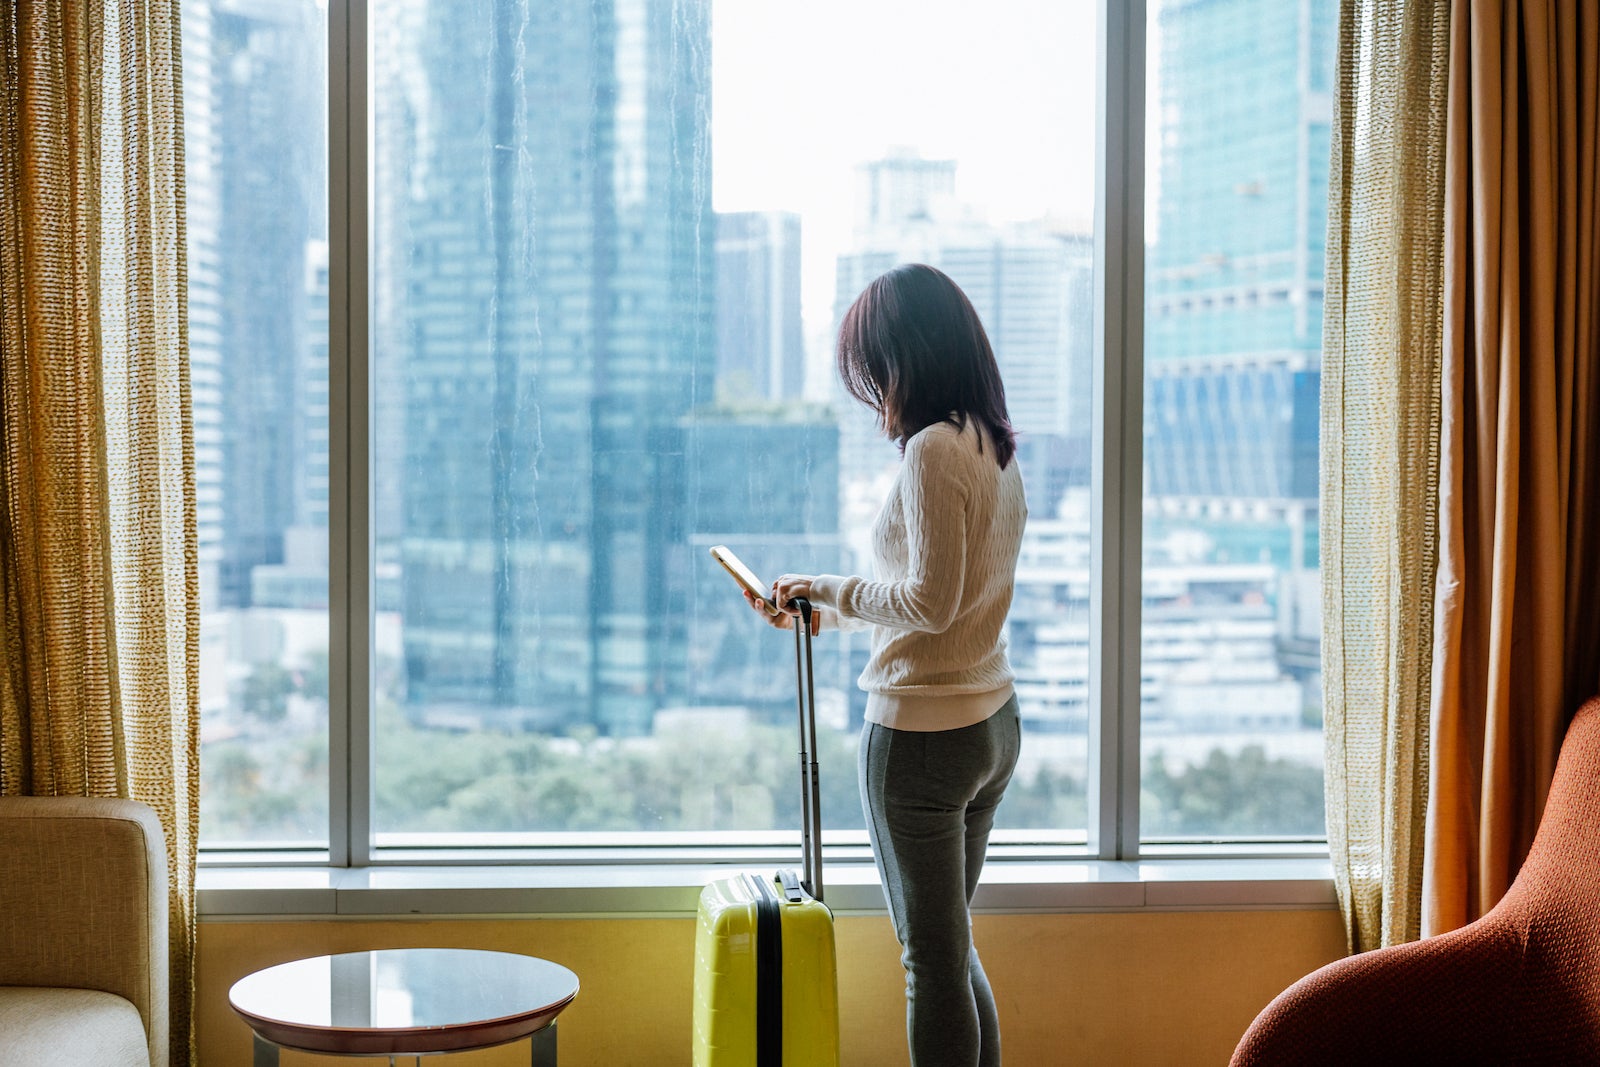 woman on phone with suitcase standing in front of window with city skyline in background